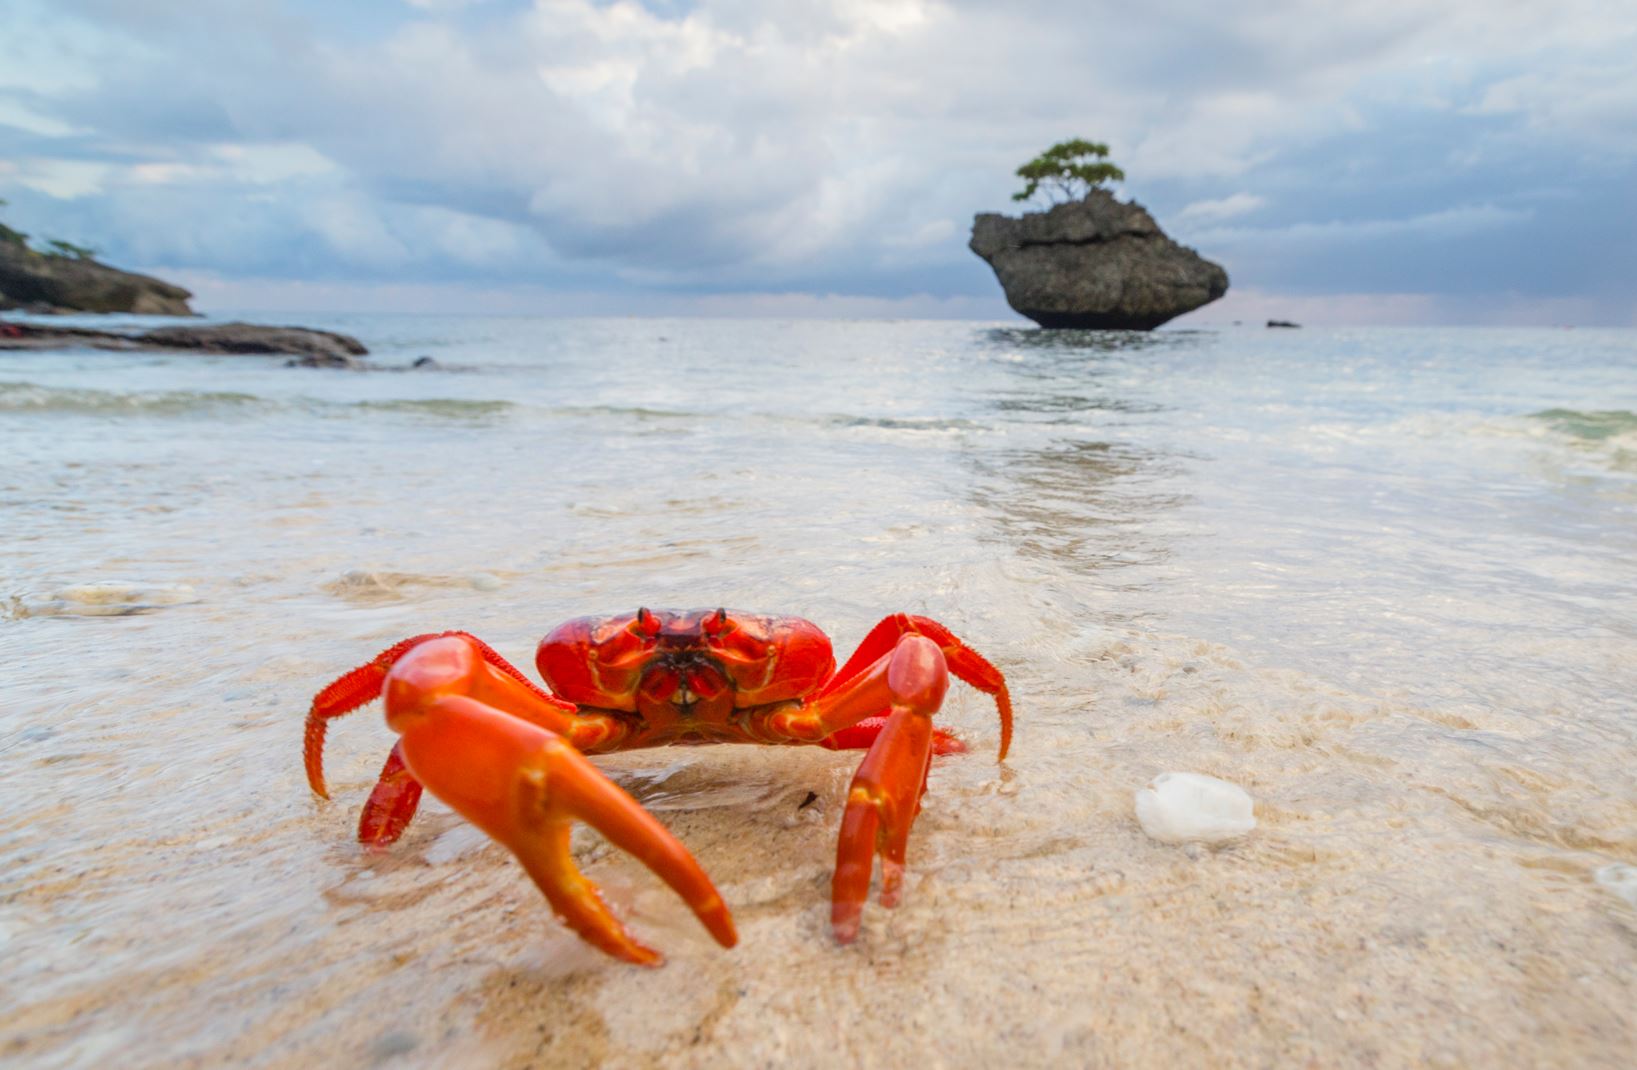 red crab on Christmas Island at the beach near Swell Lodge eco-lodge during wet season red crab migration